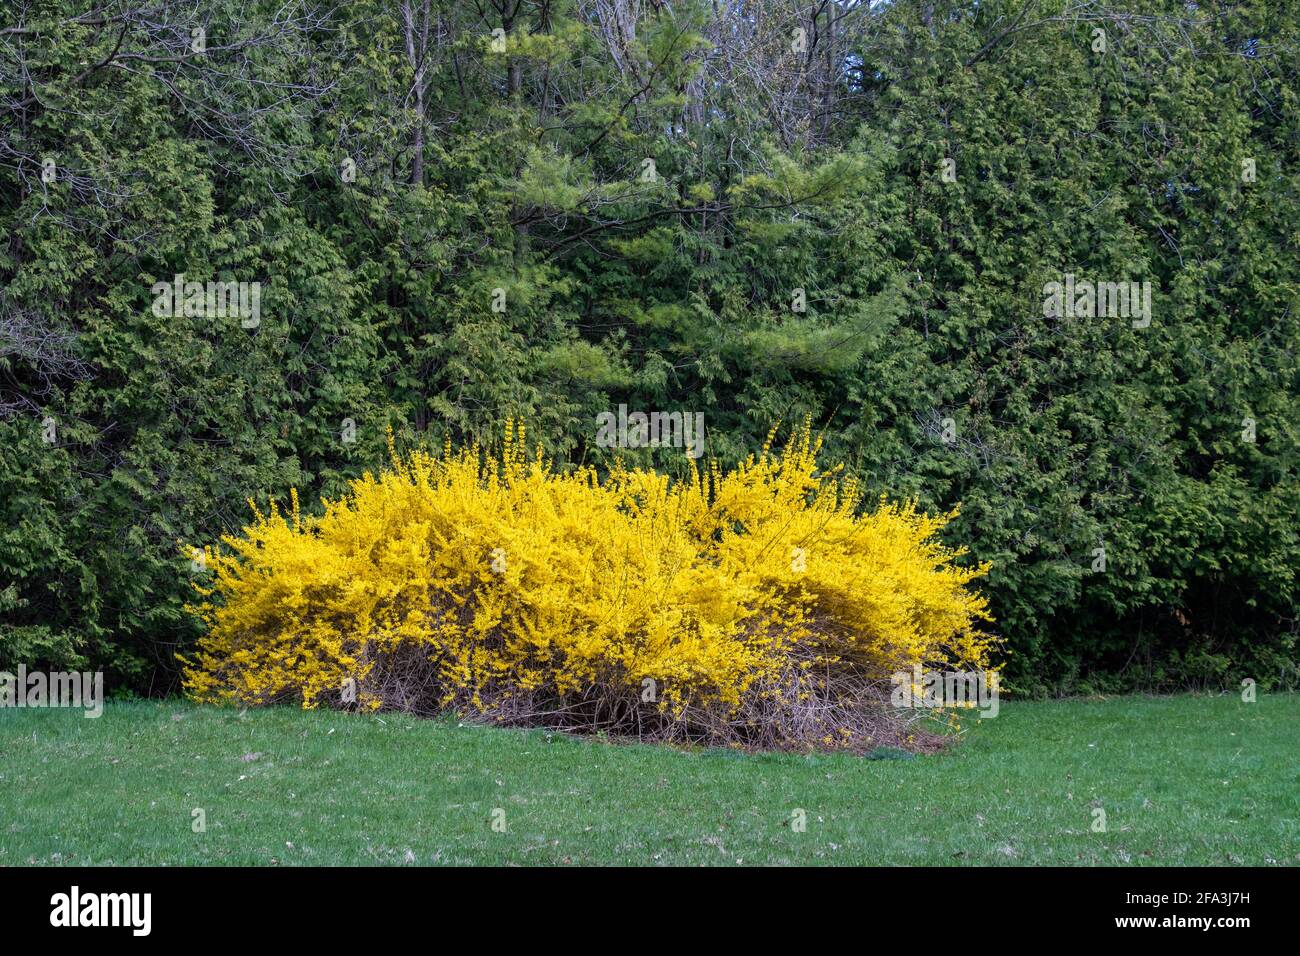 Bright yellow weeping forsythia in bloom against the green of conifer trees Stock Photo